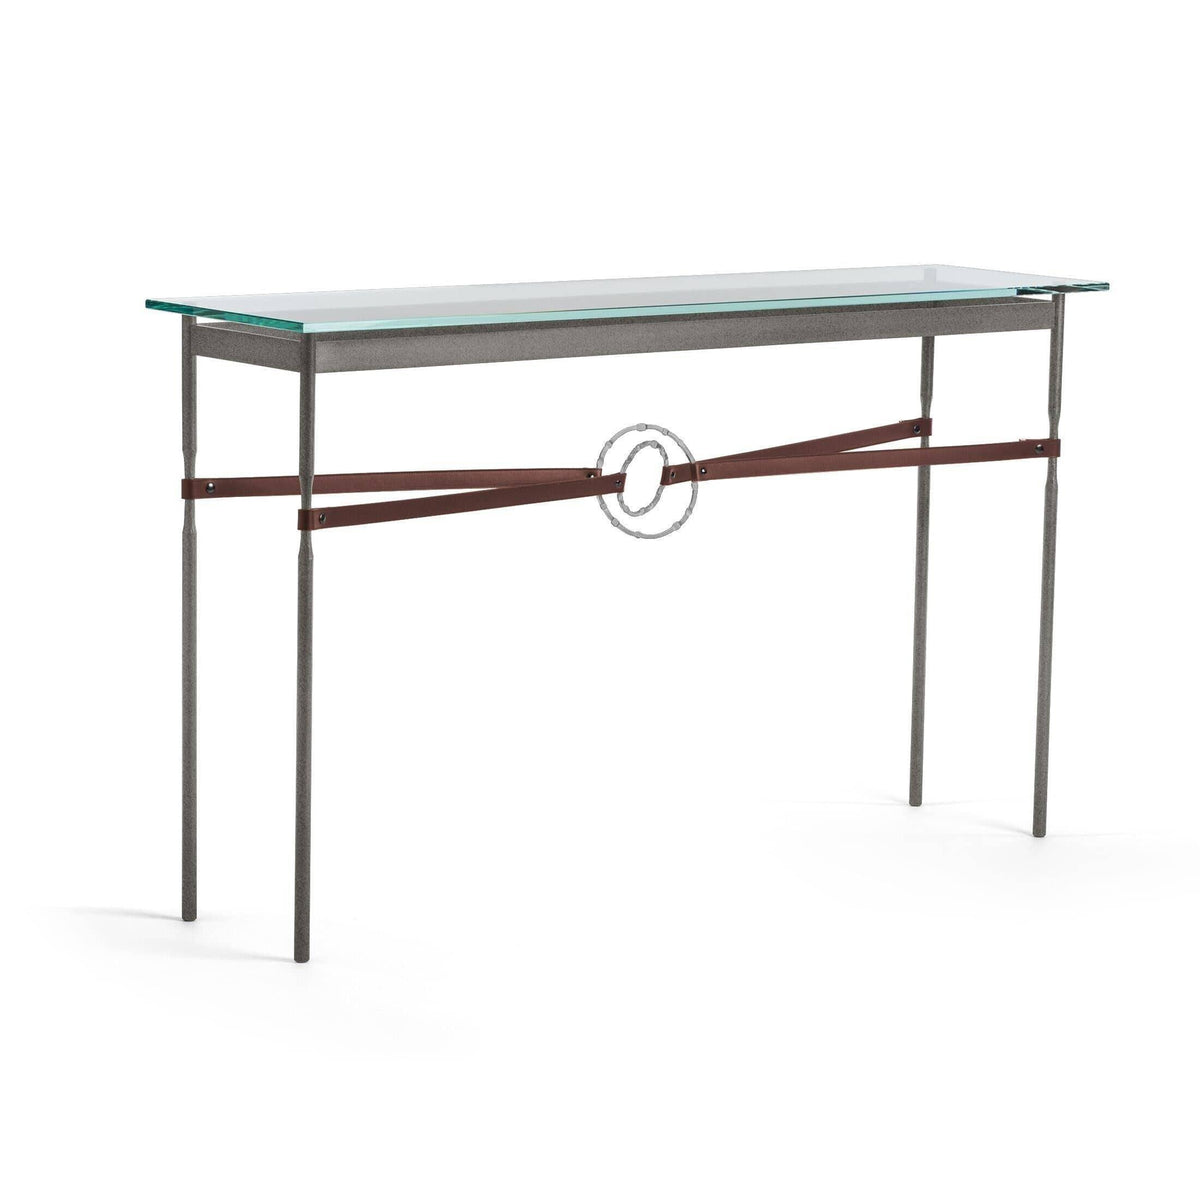 Hubbardton Forge - Equus Brown Leather Console Table - 750118-20-82-LB-VA0714 | Montreal Lighting & Hardware